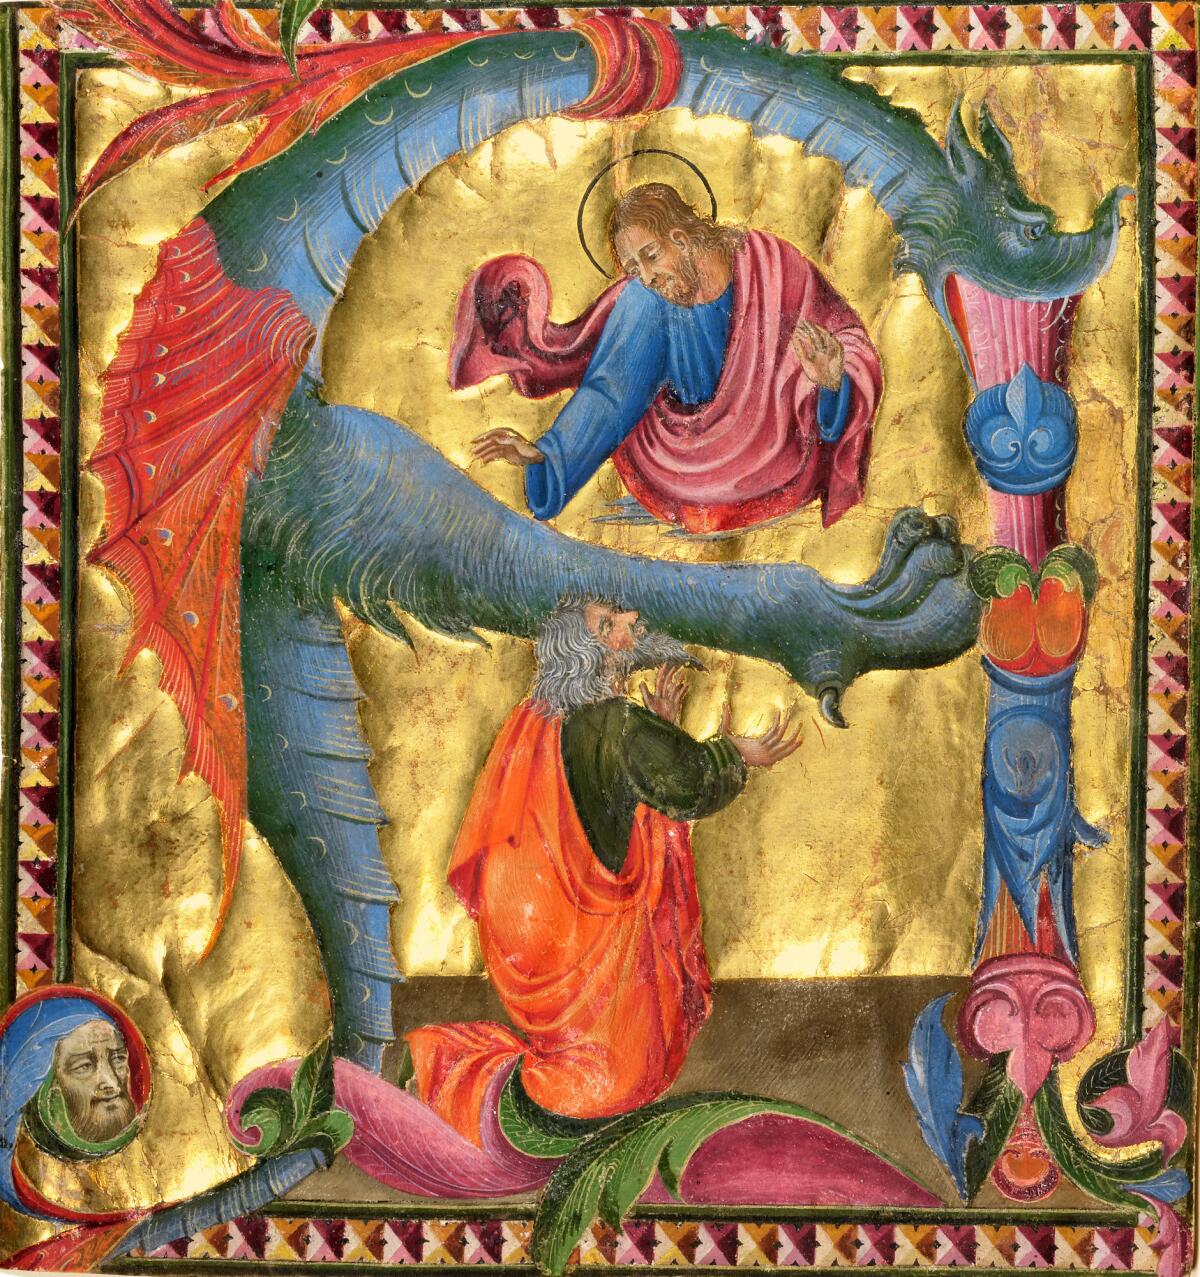 Giovanni di Paolo, "Initial A: Christ Appearing to David," about 1440, tempera, gold leaf and ink on parchment. (J. Paul Getty Museum)